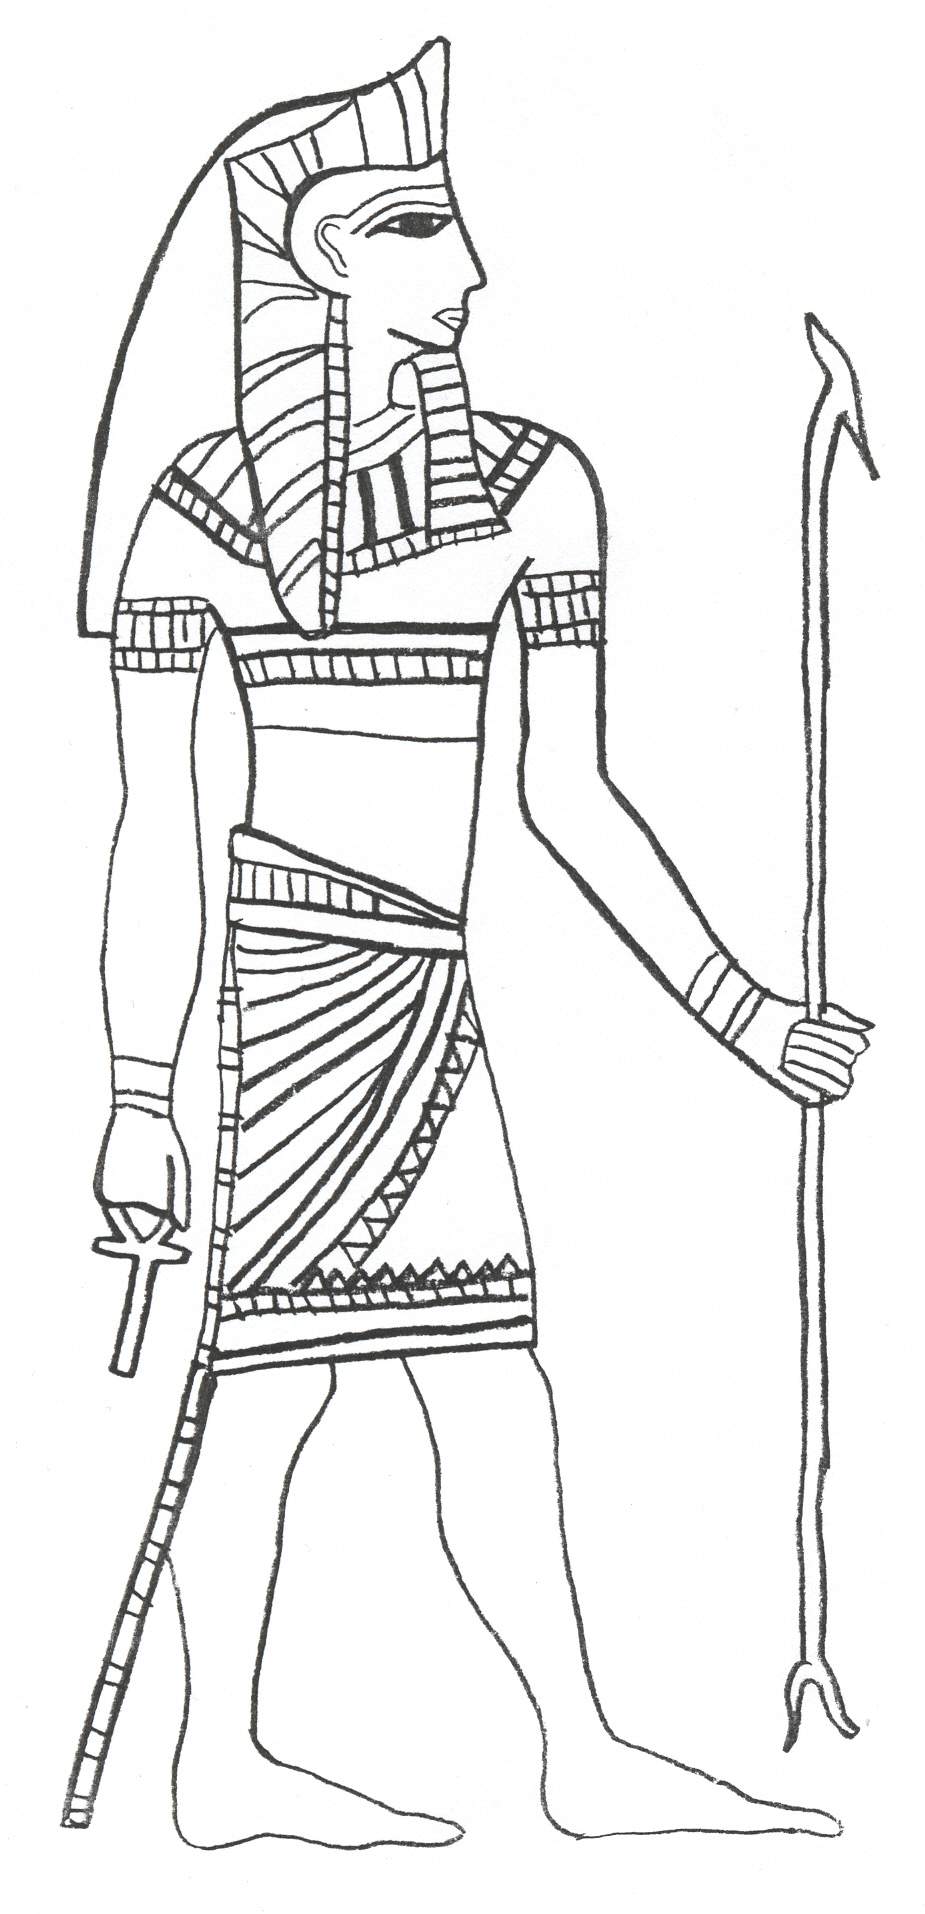 Egyptian Pharaoh Coloring Page - Coloring Home